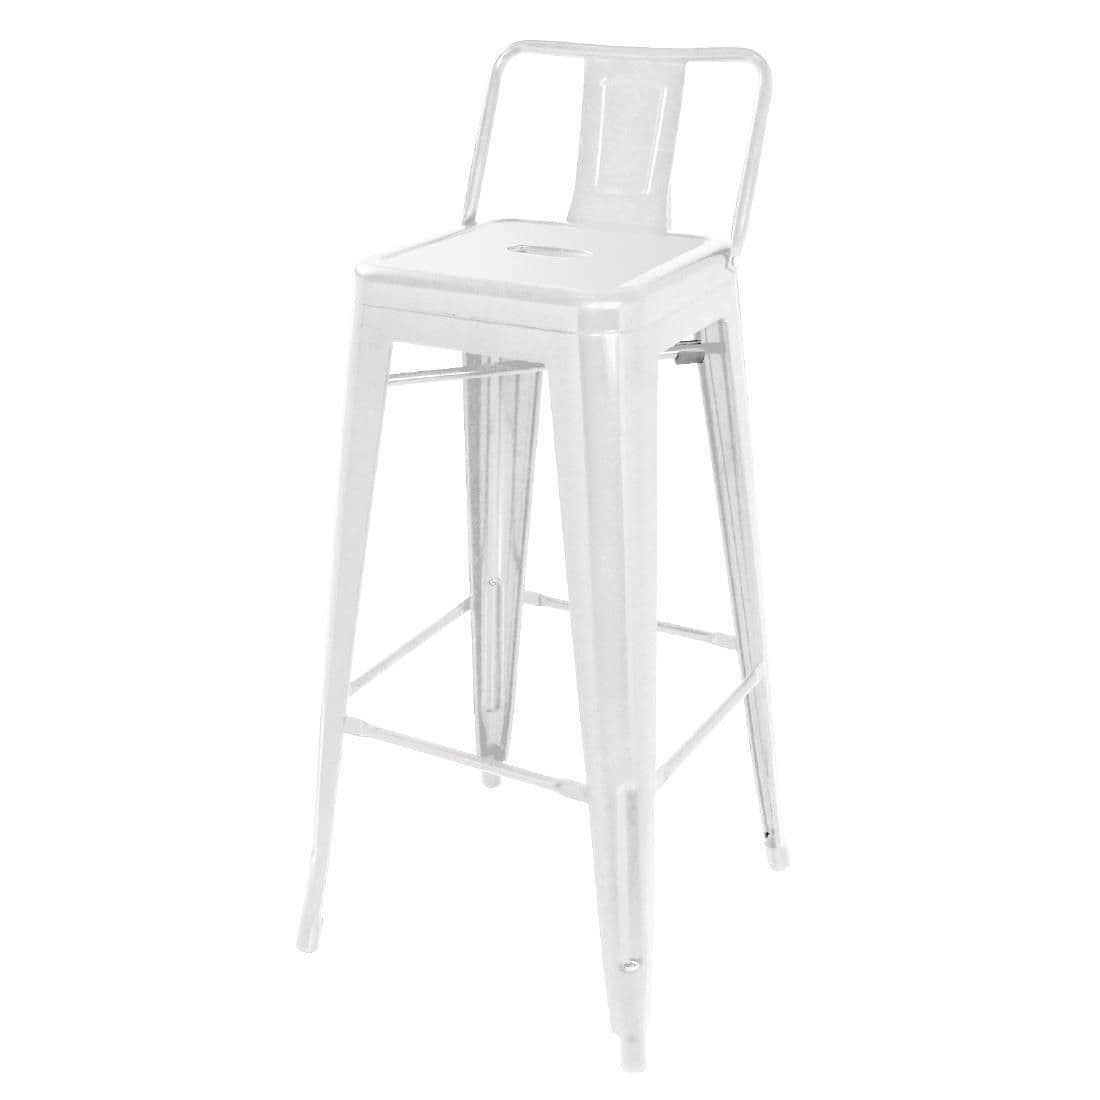 DL890 Bolero Bistro Steel High Stool With Backrest White (Pack of 4) JD Catering Equipment Solutions Ltd